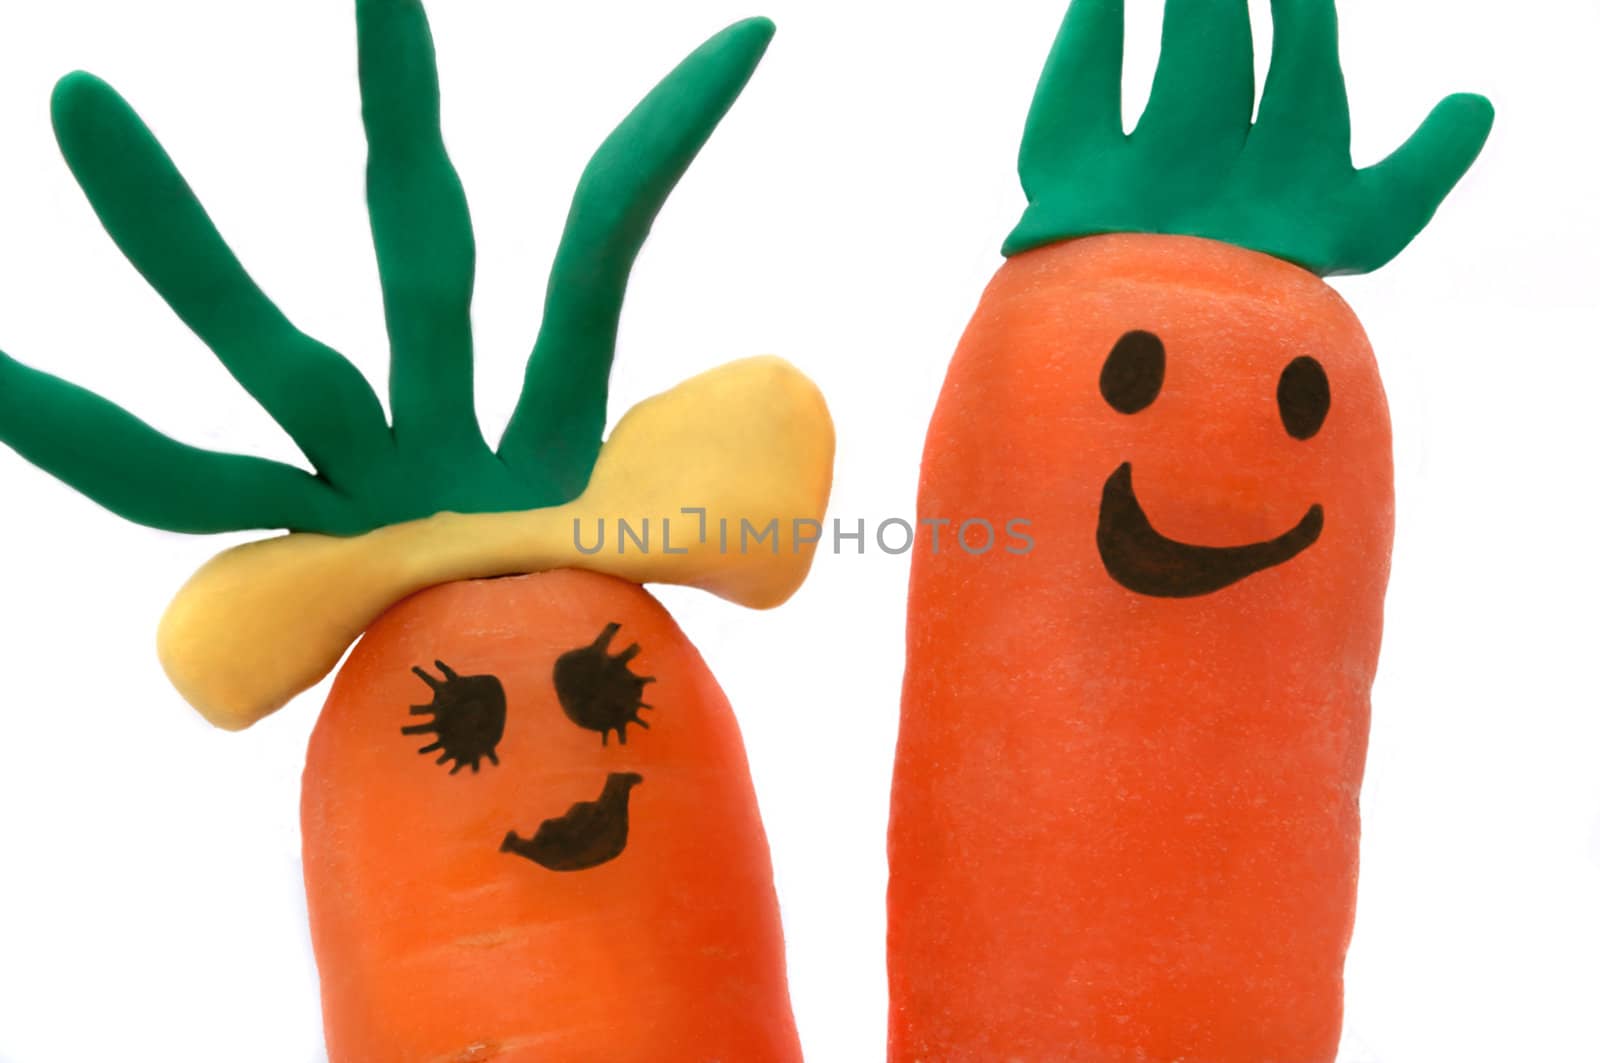 Carrot characters. by 72soul